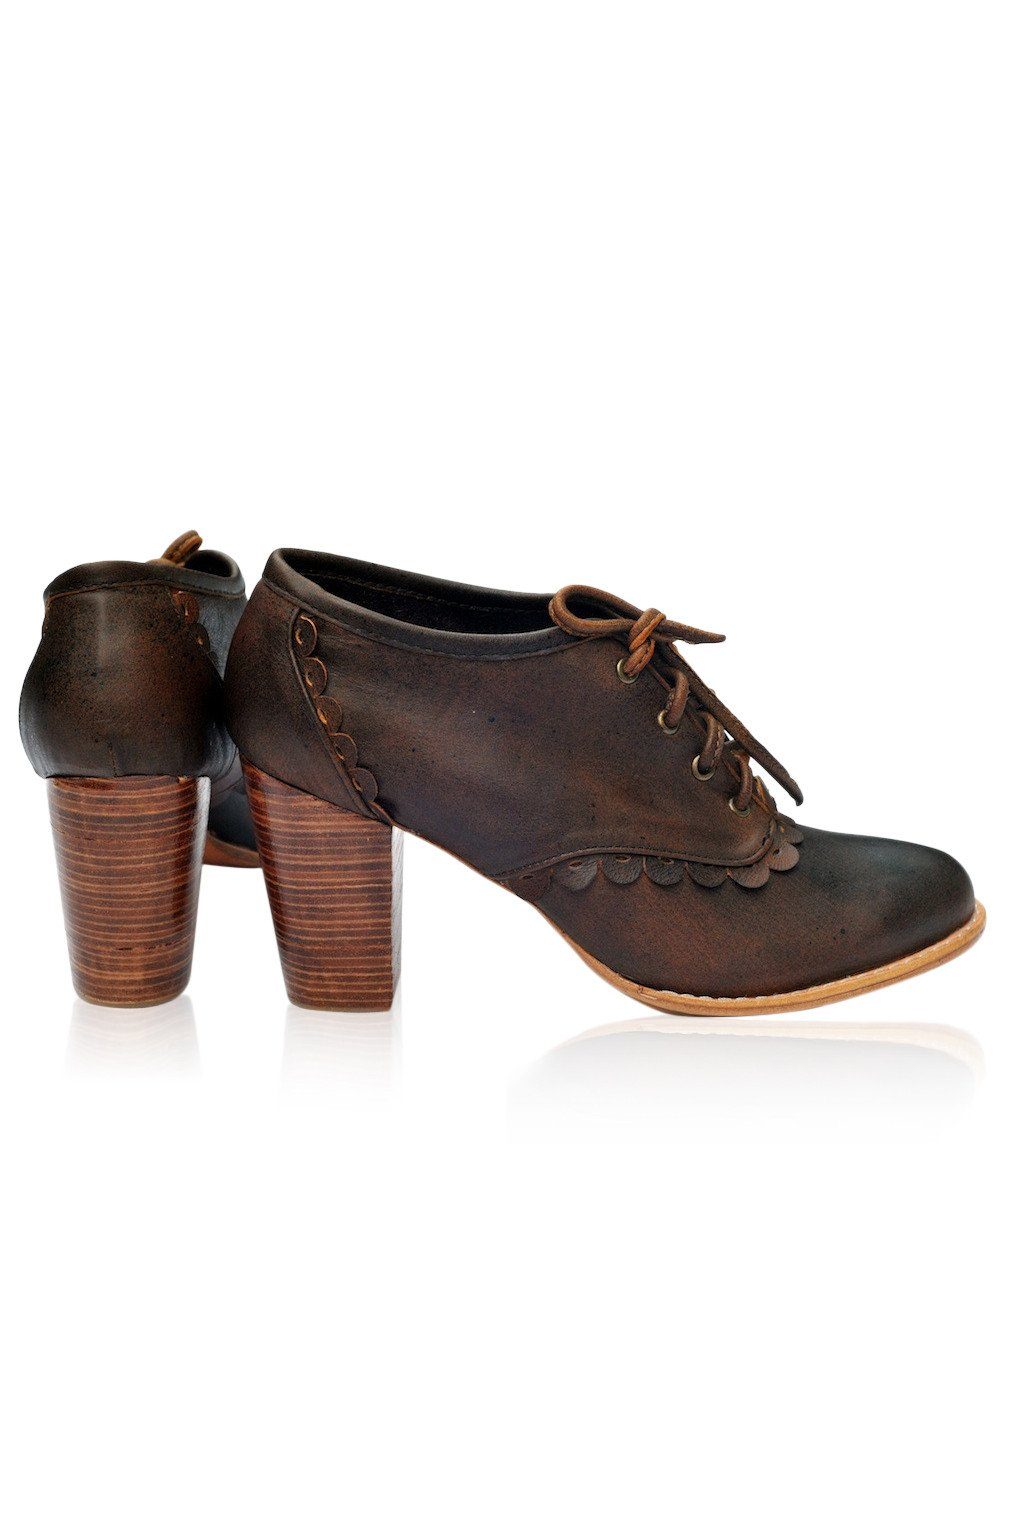 Lace Oxford Heels by ELF